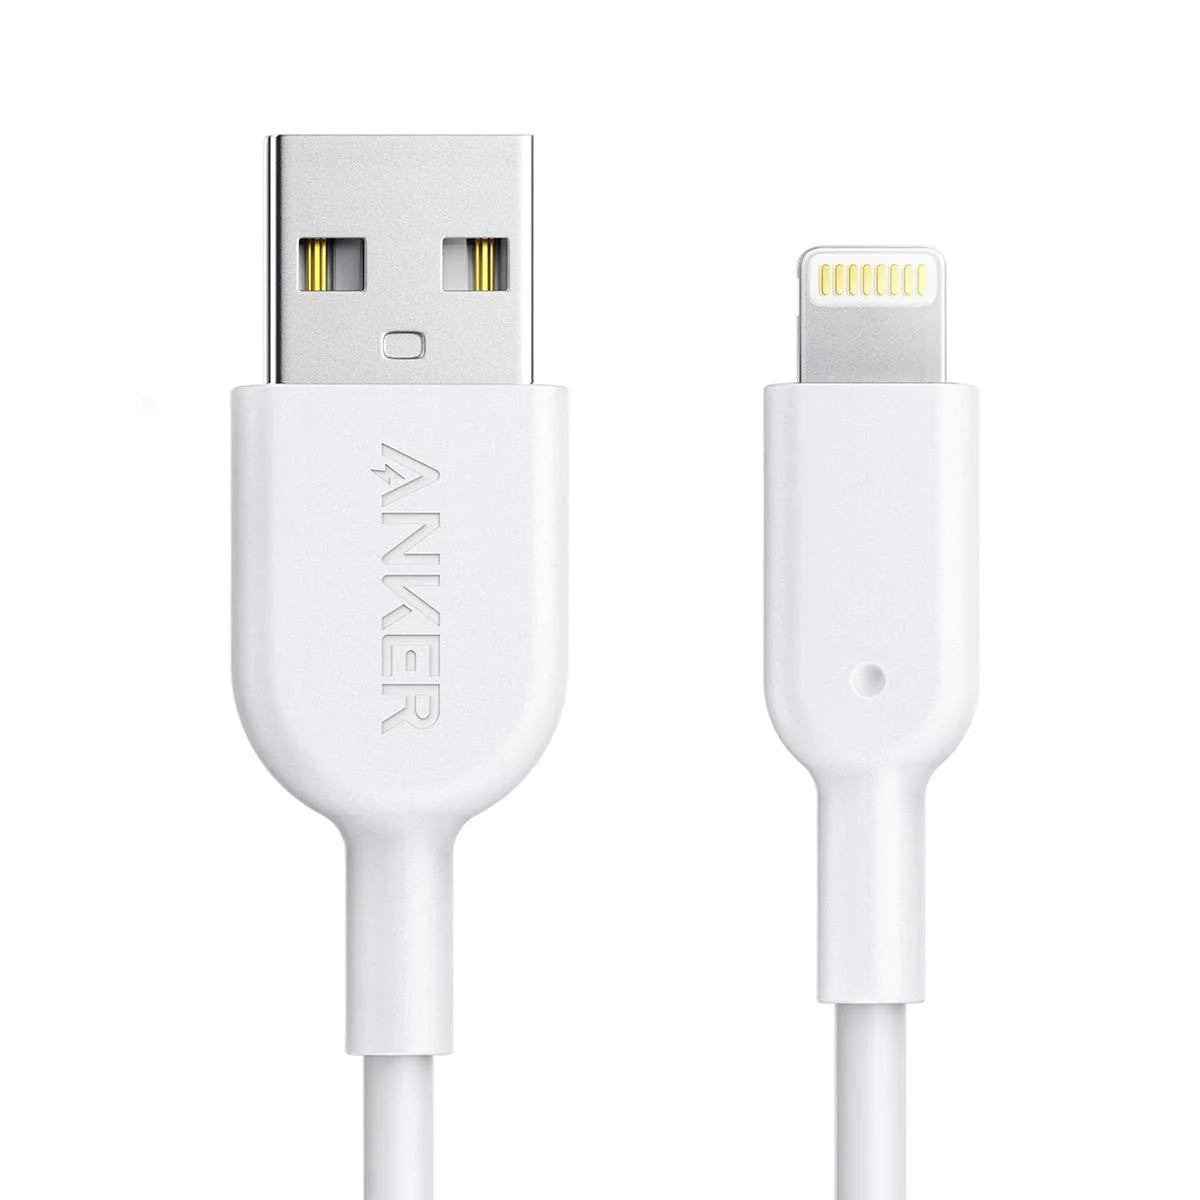 Anker Powerline II USB-A to Lightning Cable 1.8m - White with 18 months official warranty